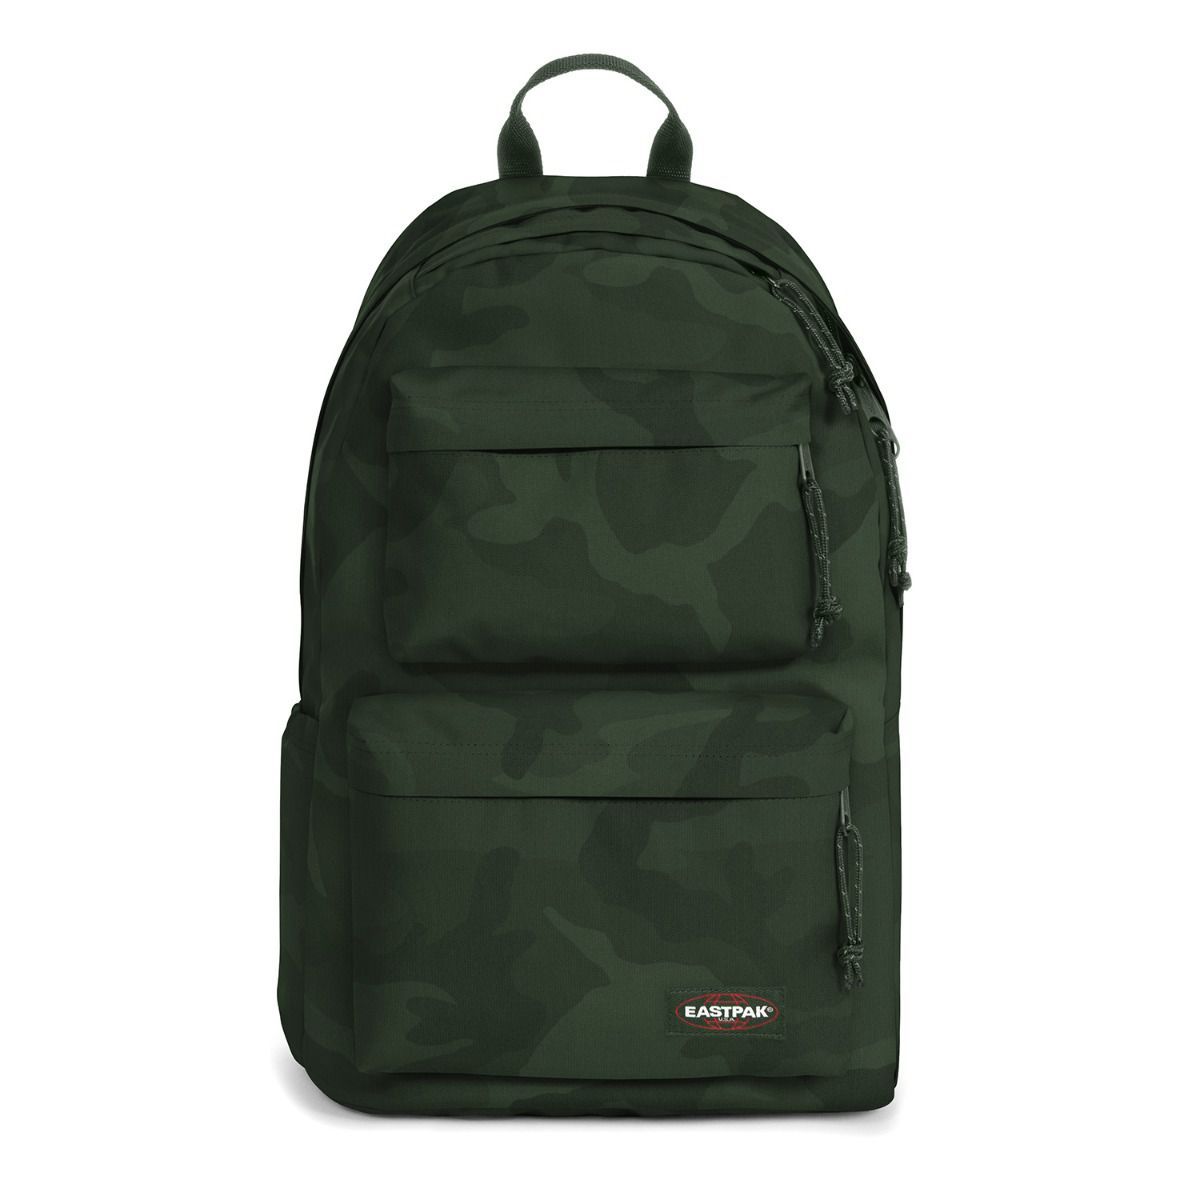 Eastpak Padded Double Casual Camo Rucksack